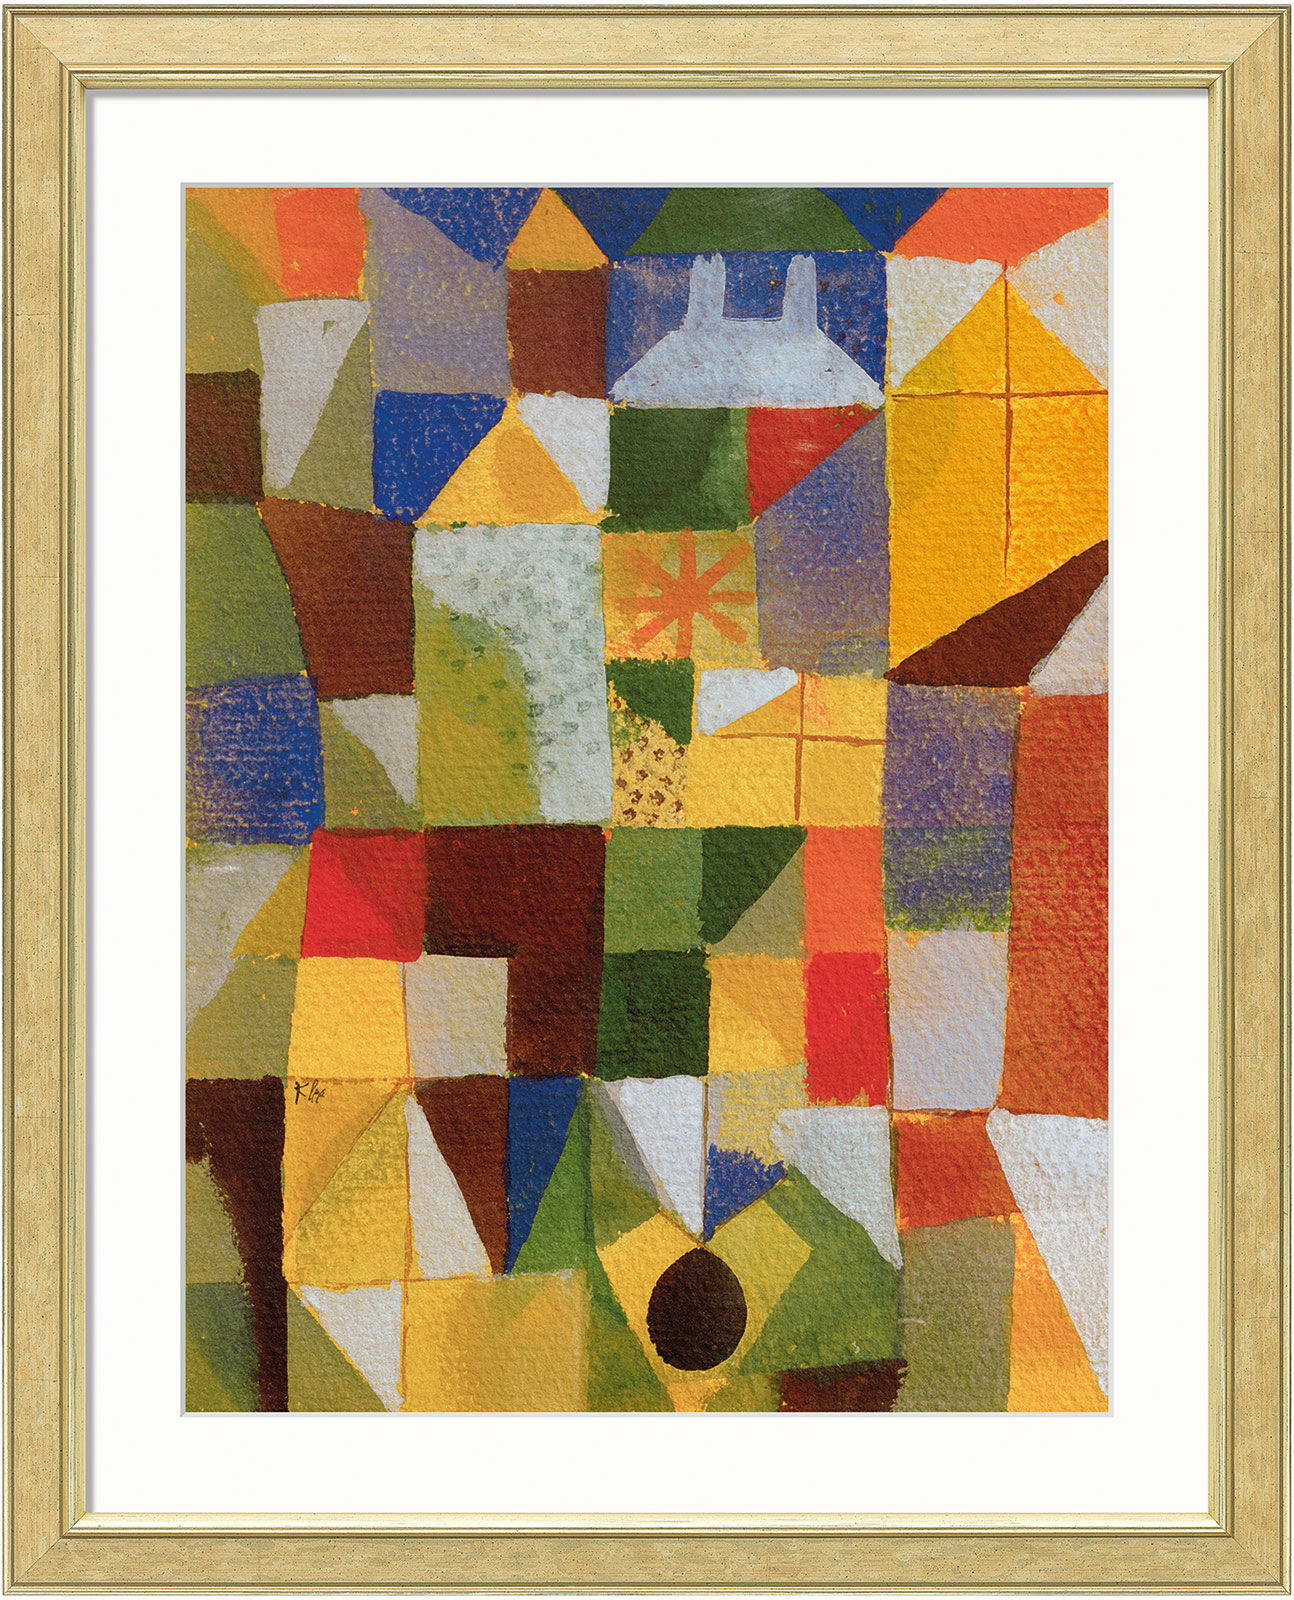 Picture "Urban Composition with Yellow Windows" (1919), framed by Paul Klee